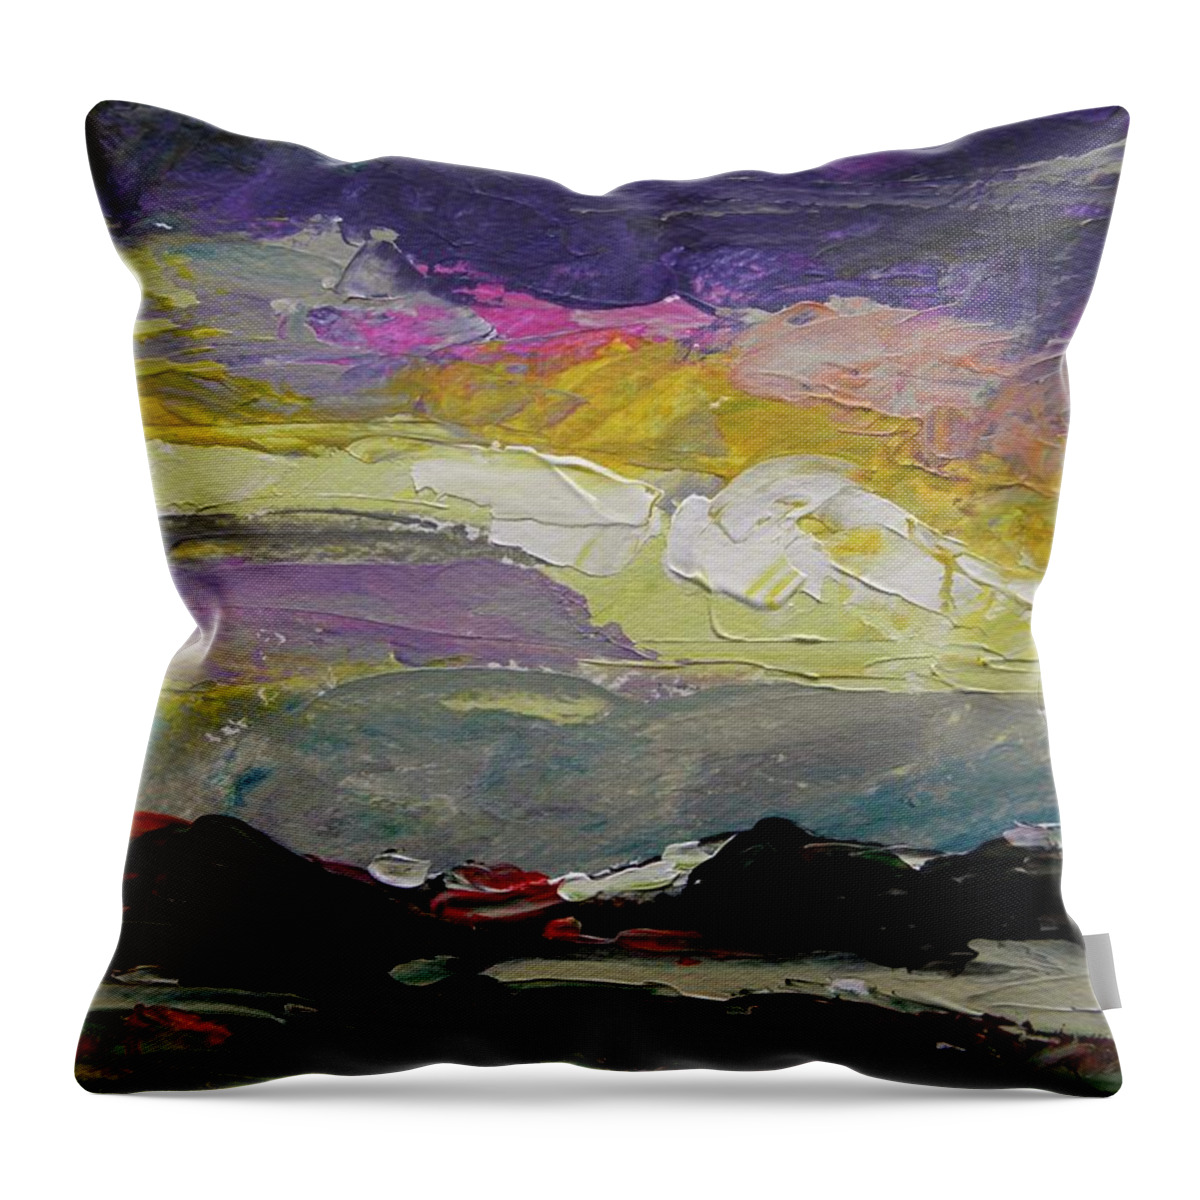 Sky Throw Pillow featuring the painting Morning Break Through by John Williams